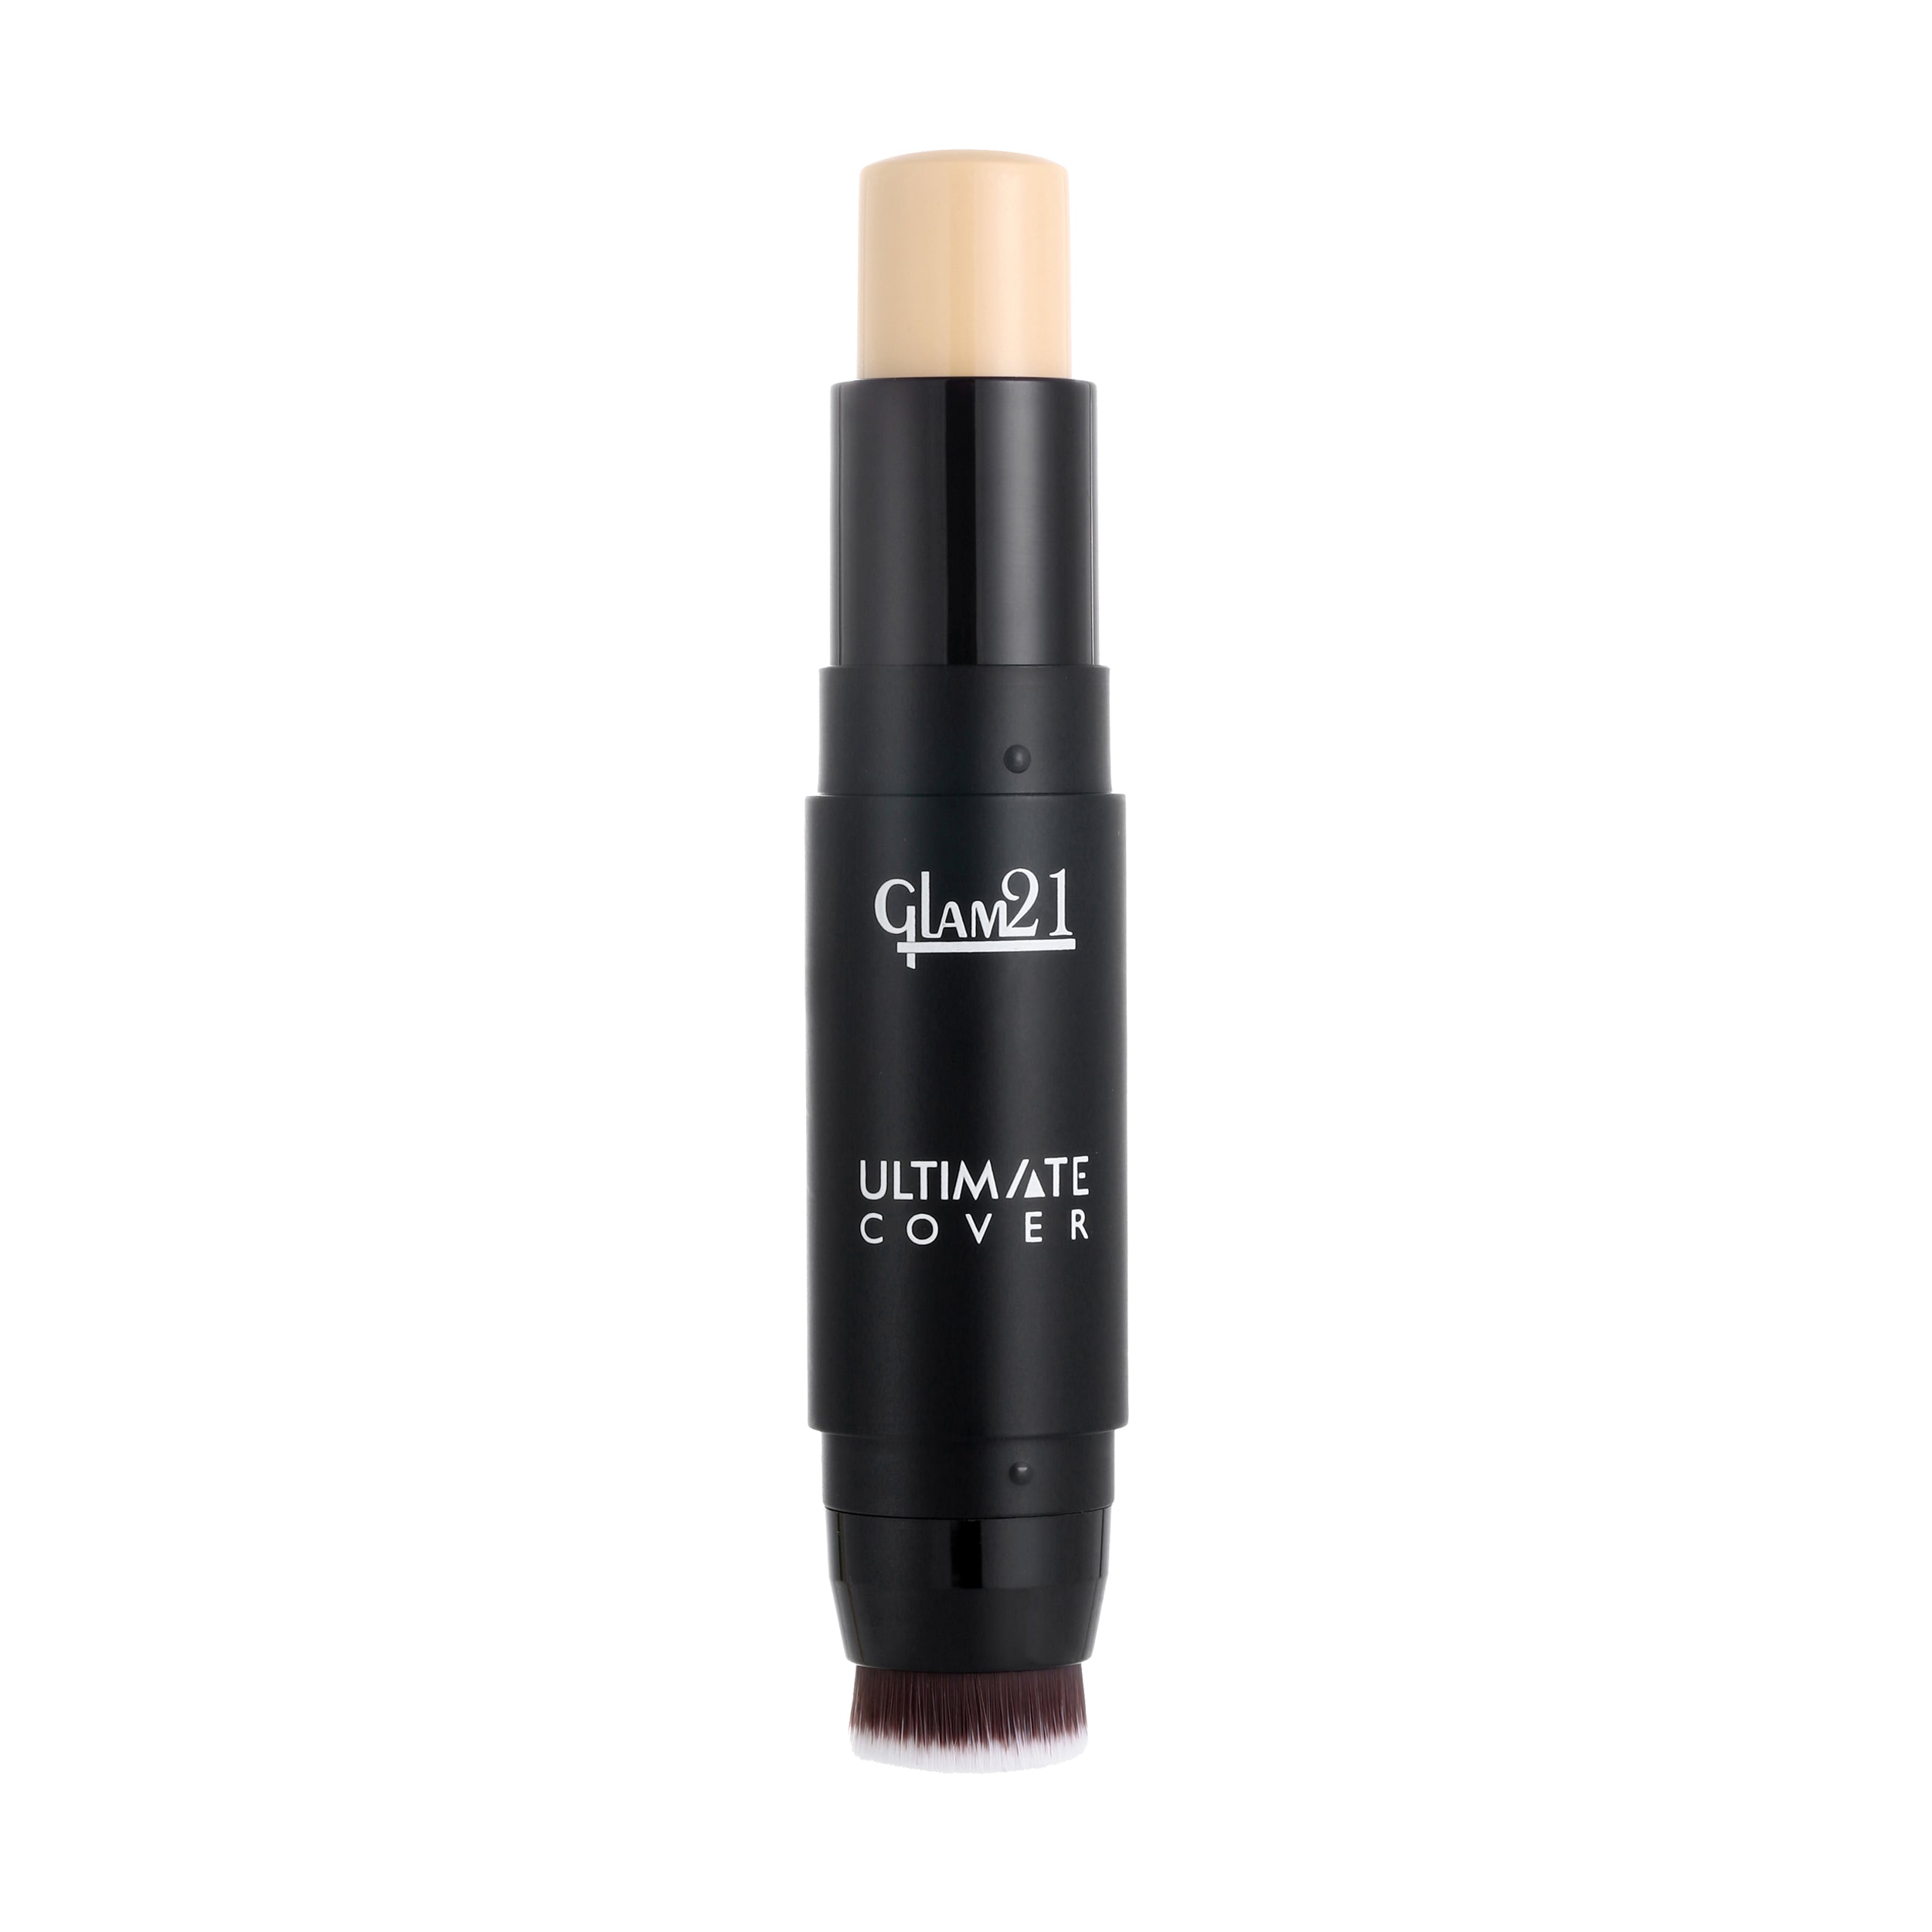 Glam21 Ultimate Cover Foundation Stick Easy to Blend & Gives Matte Finish upto 12 Hours Foundation (02-Sand, 8 g)